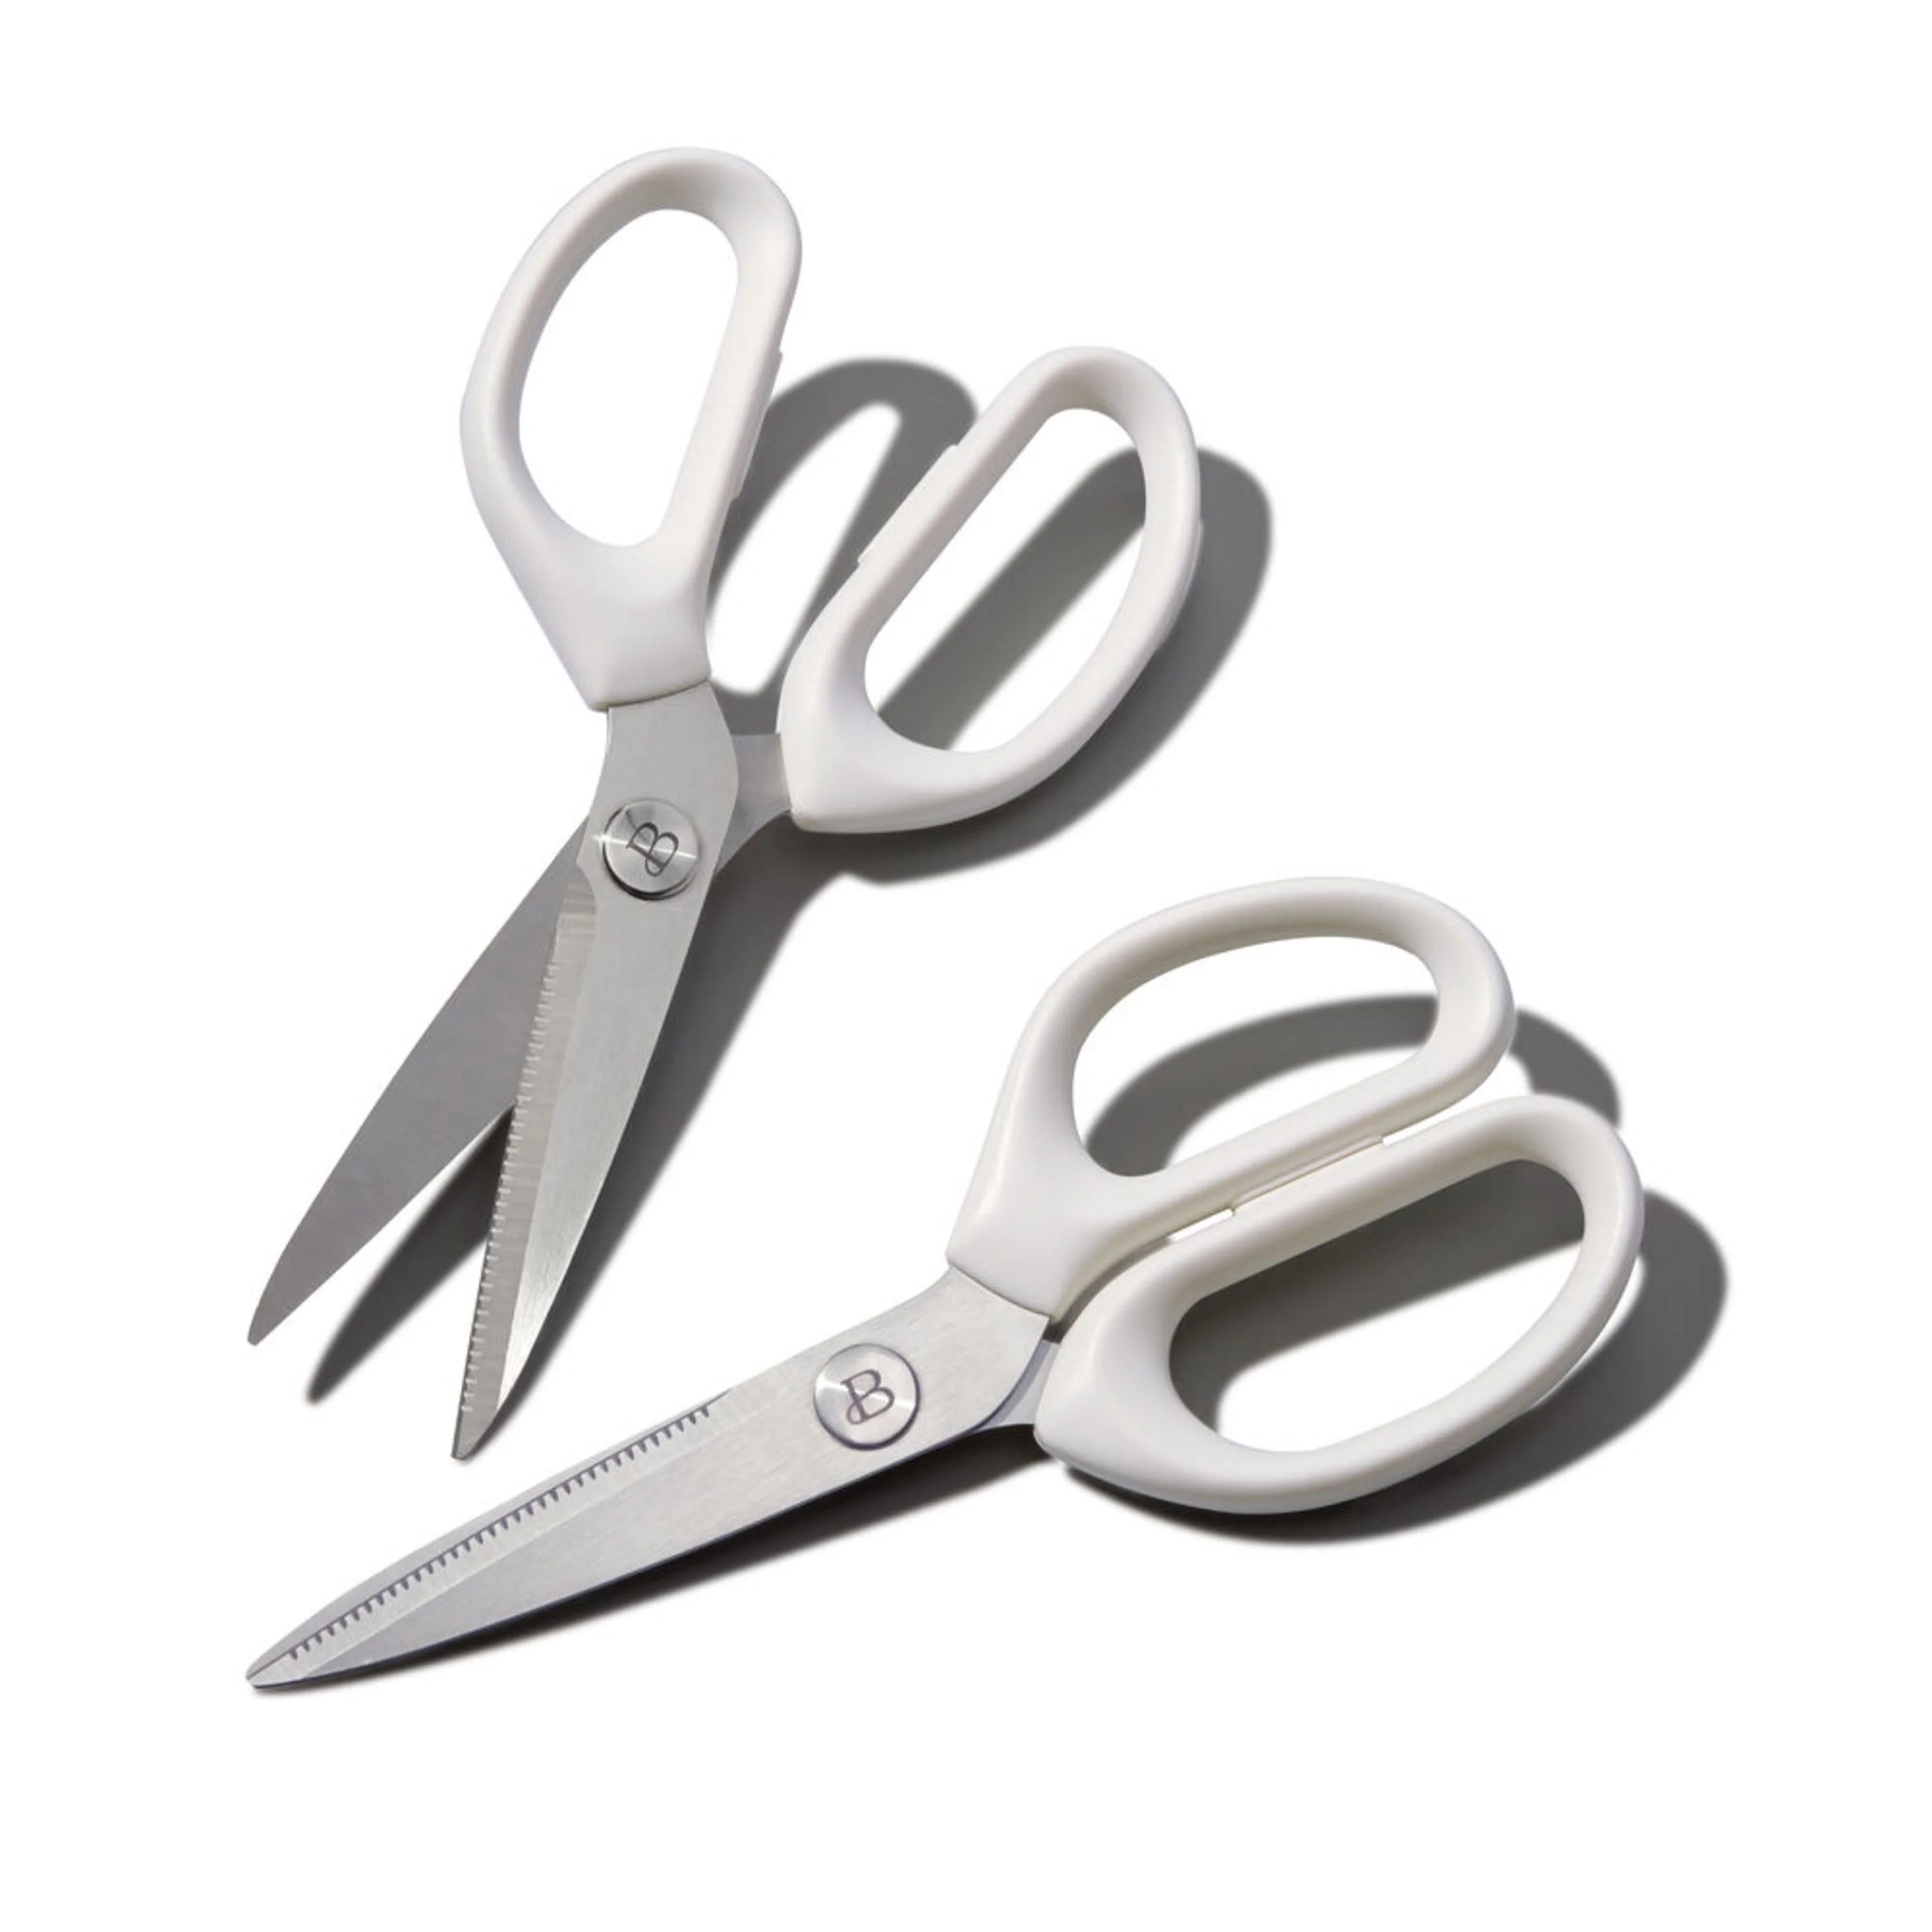 Beautiful 2-Piece All-Purpose Stainless Steel Shears in White, by Drew Barrymore | Walmart (US)